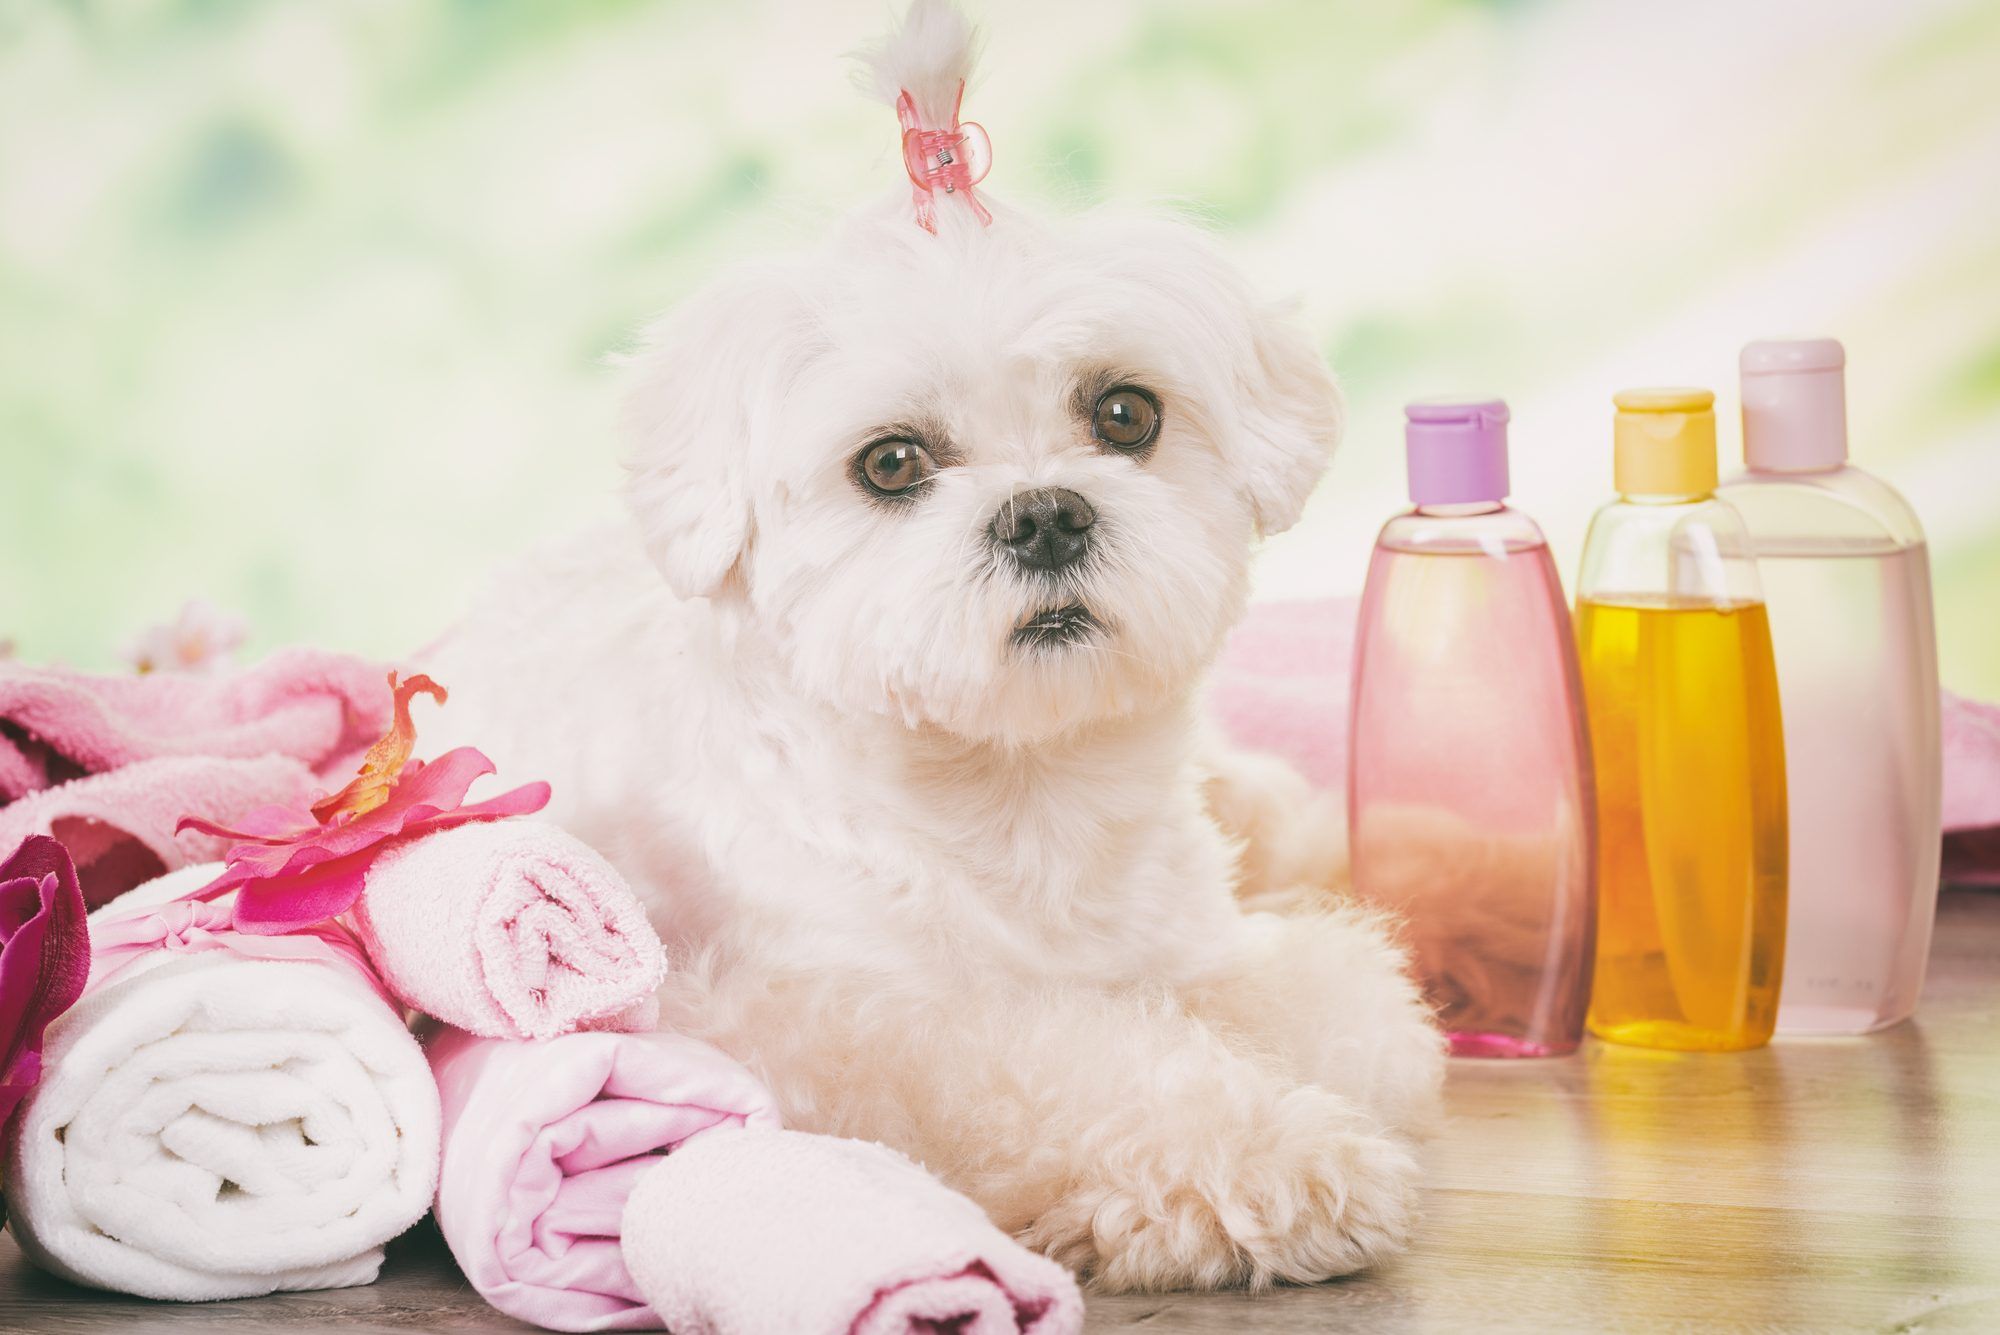 A Martha Stewart class action lawsuit has been filed over false advertising for pet products.